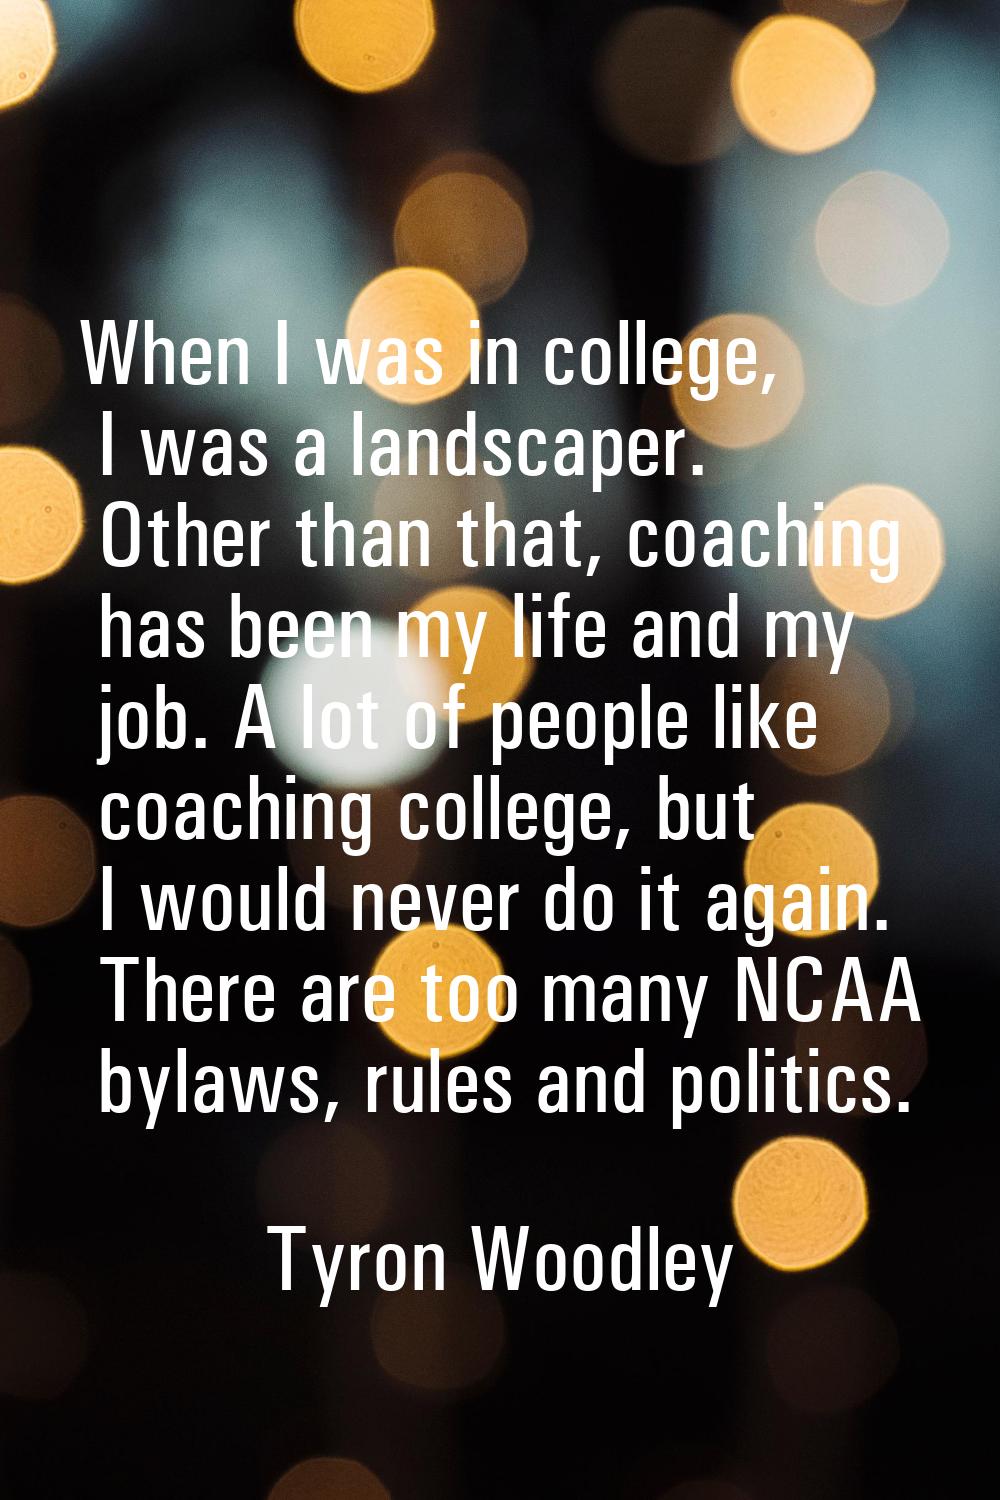 When I was in college, I was a landscaper. Other than that, coaching has been my life and my job. A